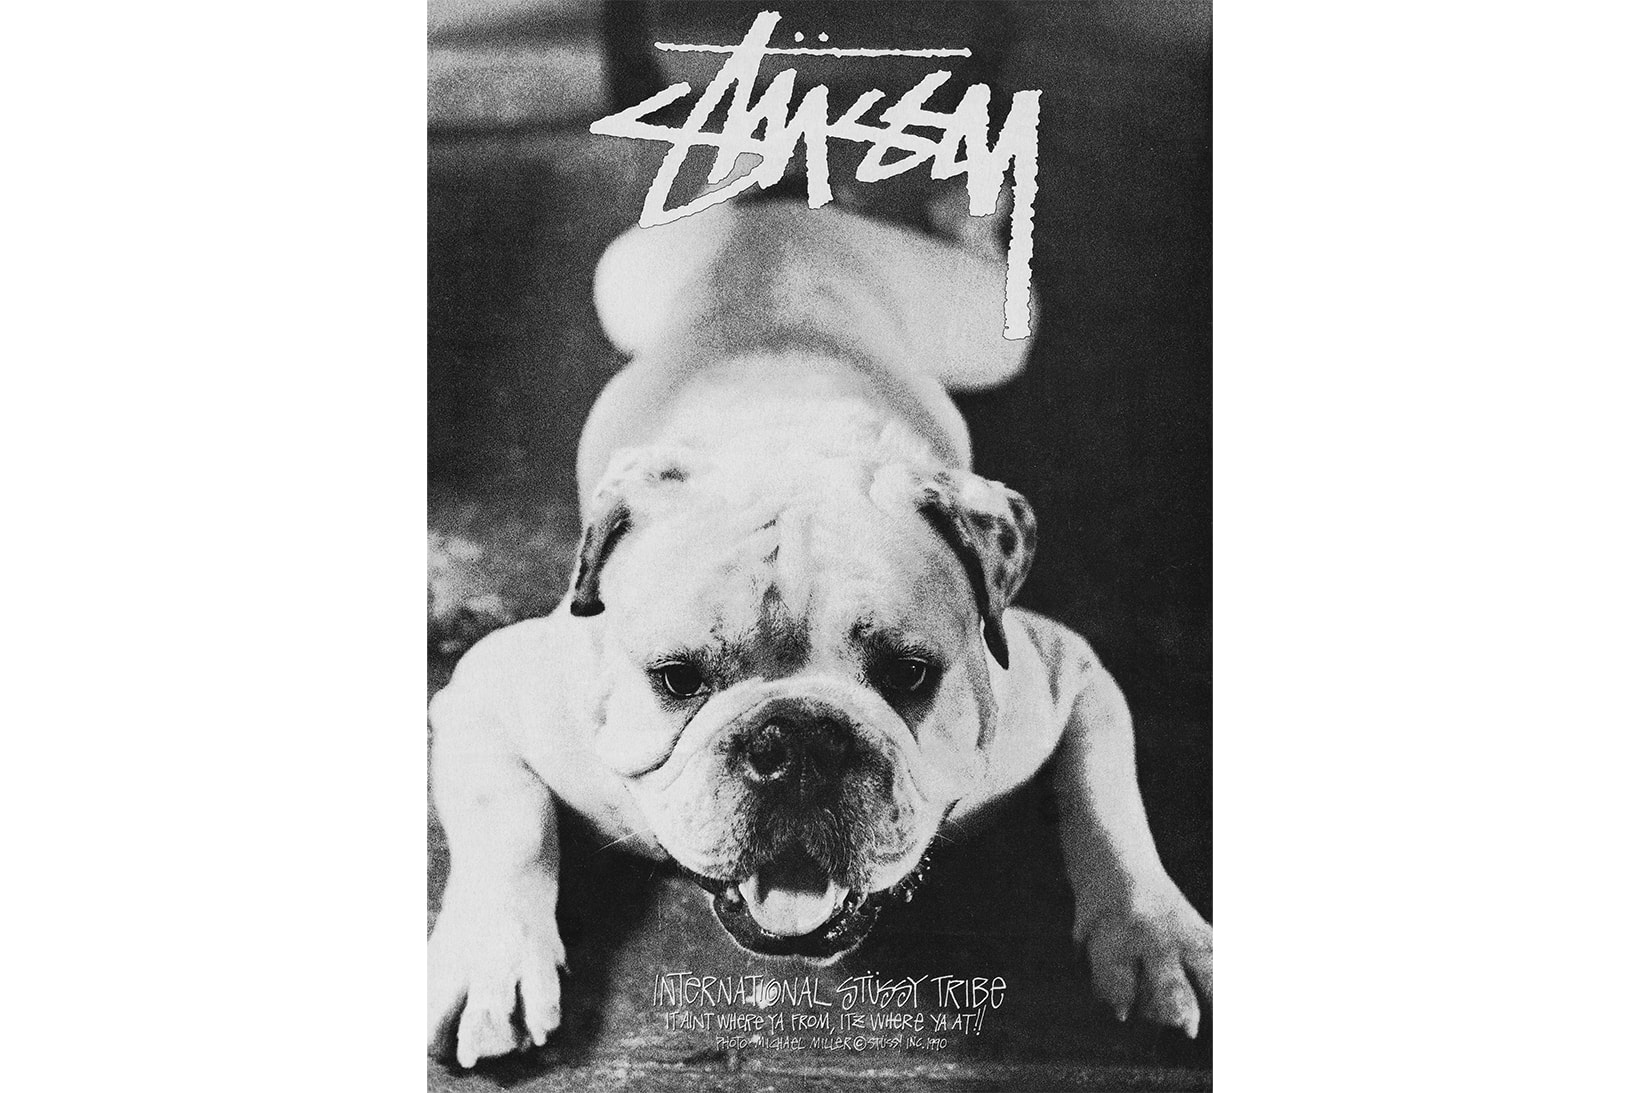 Stussy 2017 Fall Campaign Archive Archival Ads Advertisements